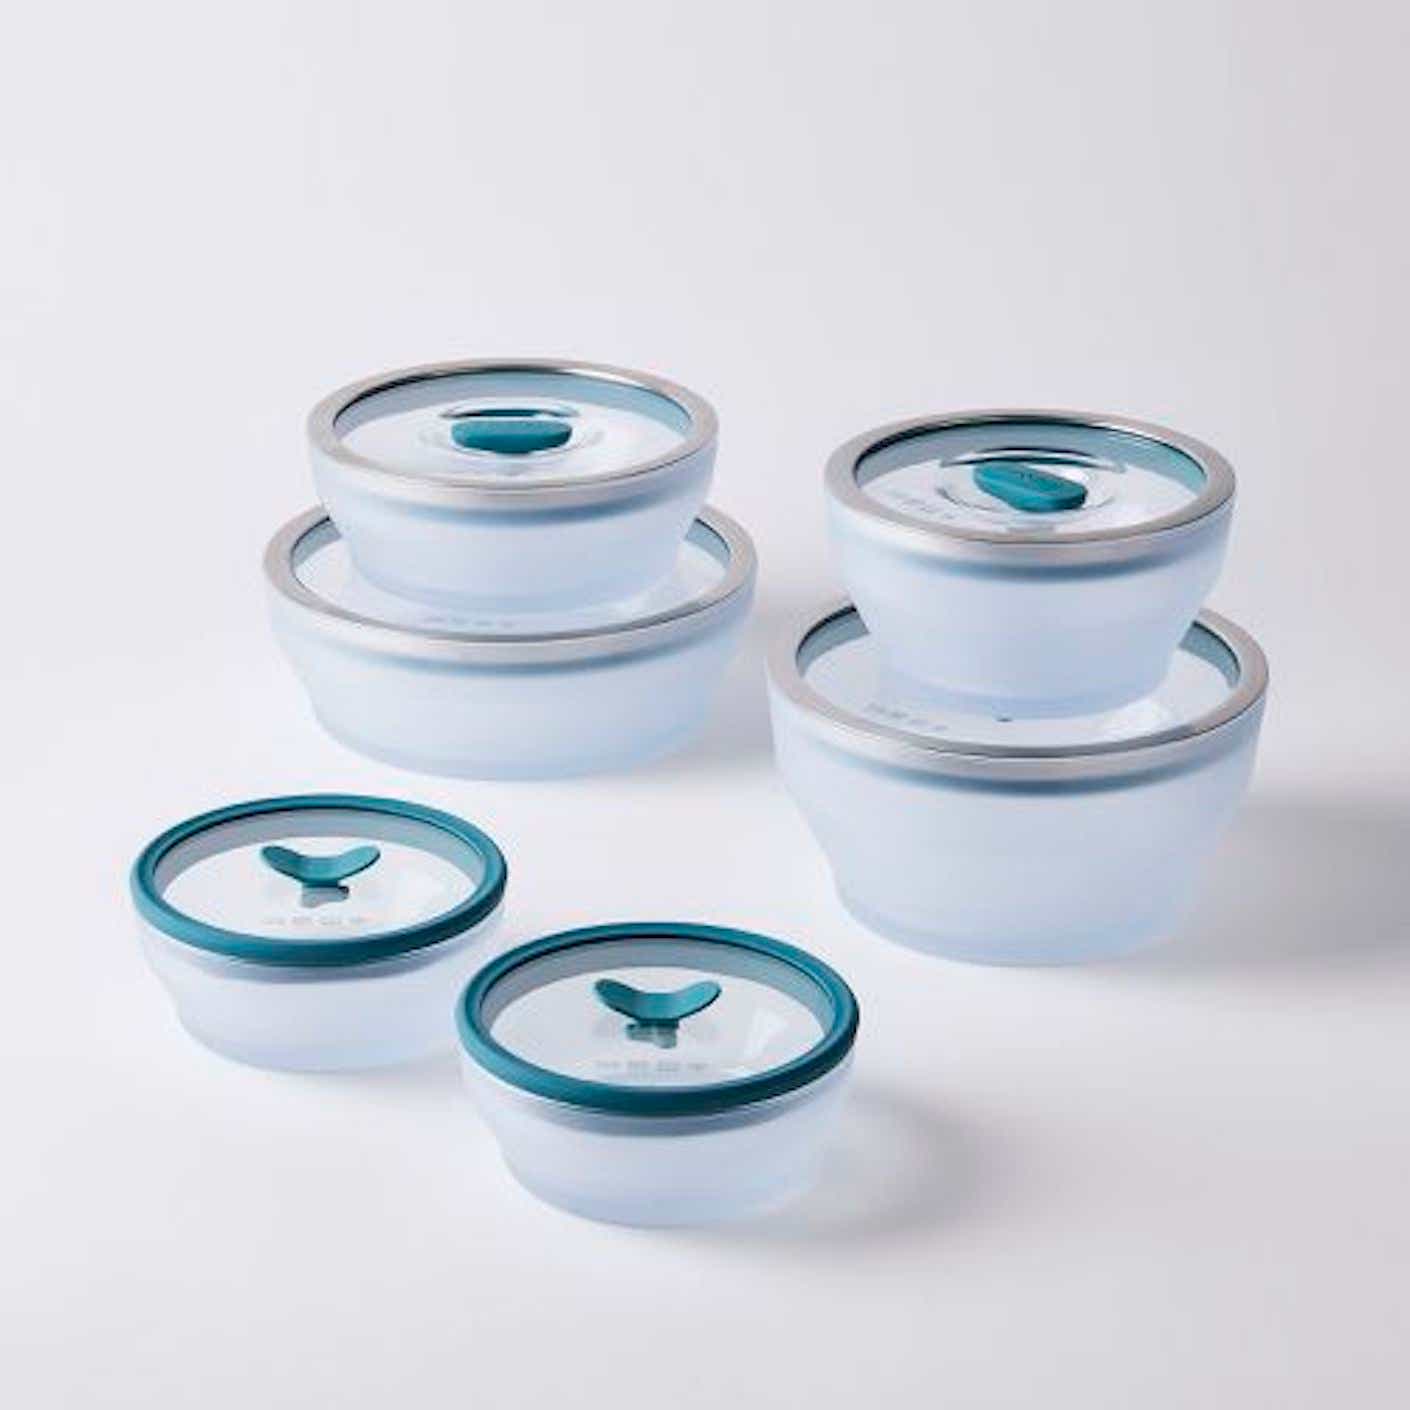 A set of six microwave-safe clear glass bowls with plastic and metal lids are stacked on top of each other.